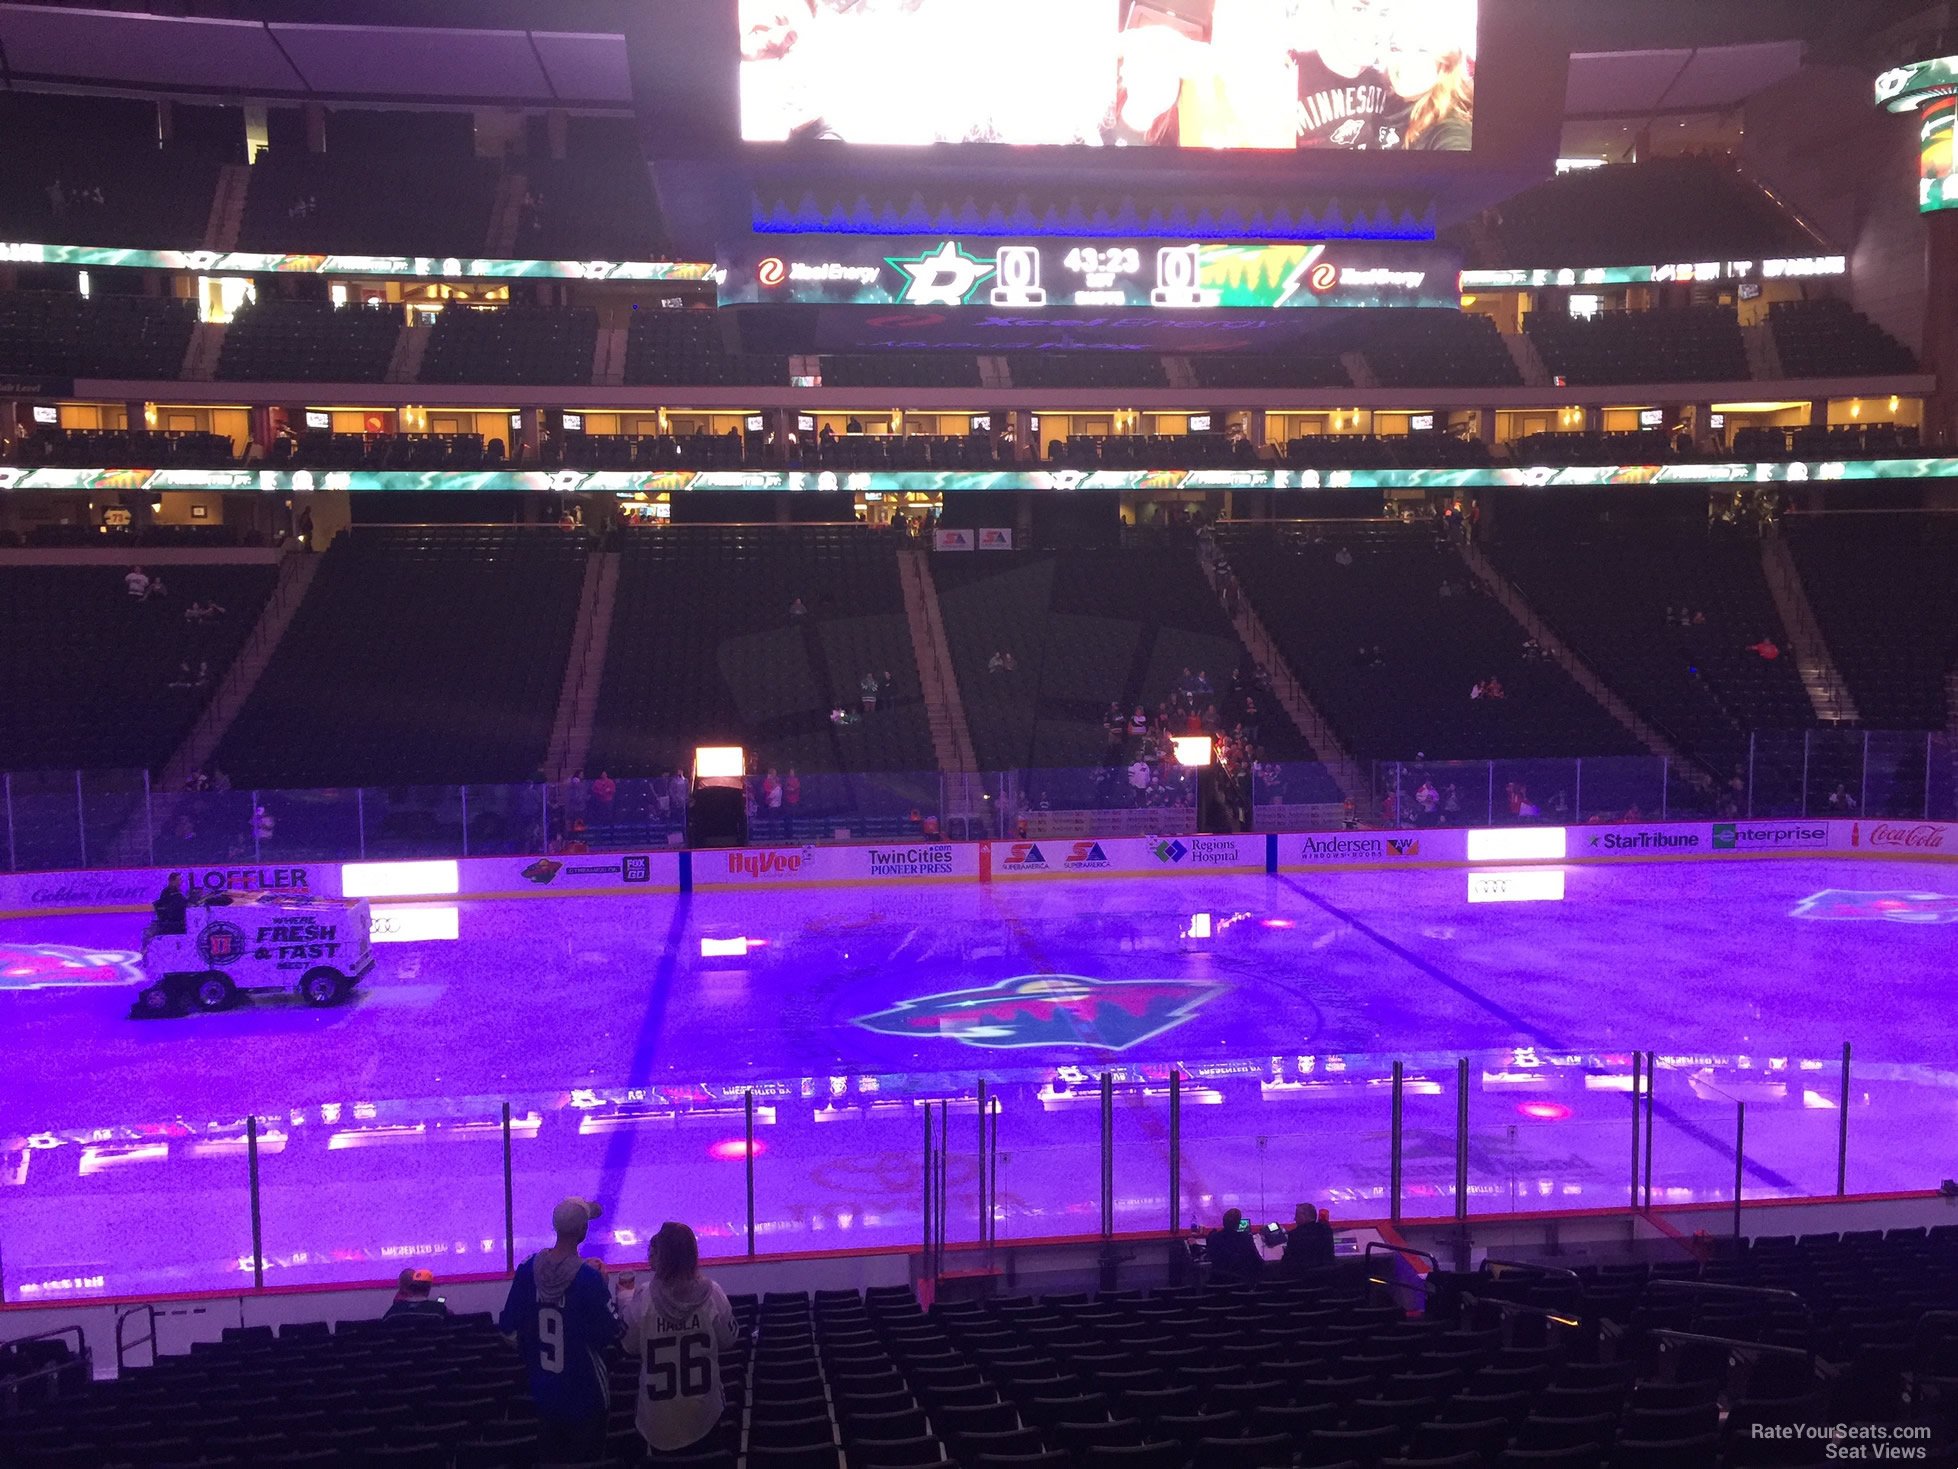 section 104, row 24 seat view  for hockey - xcel energy center